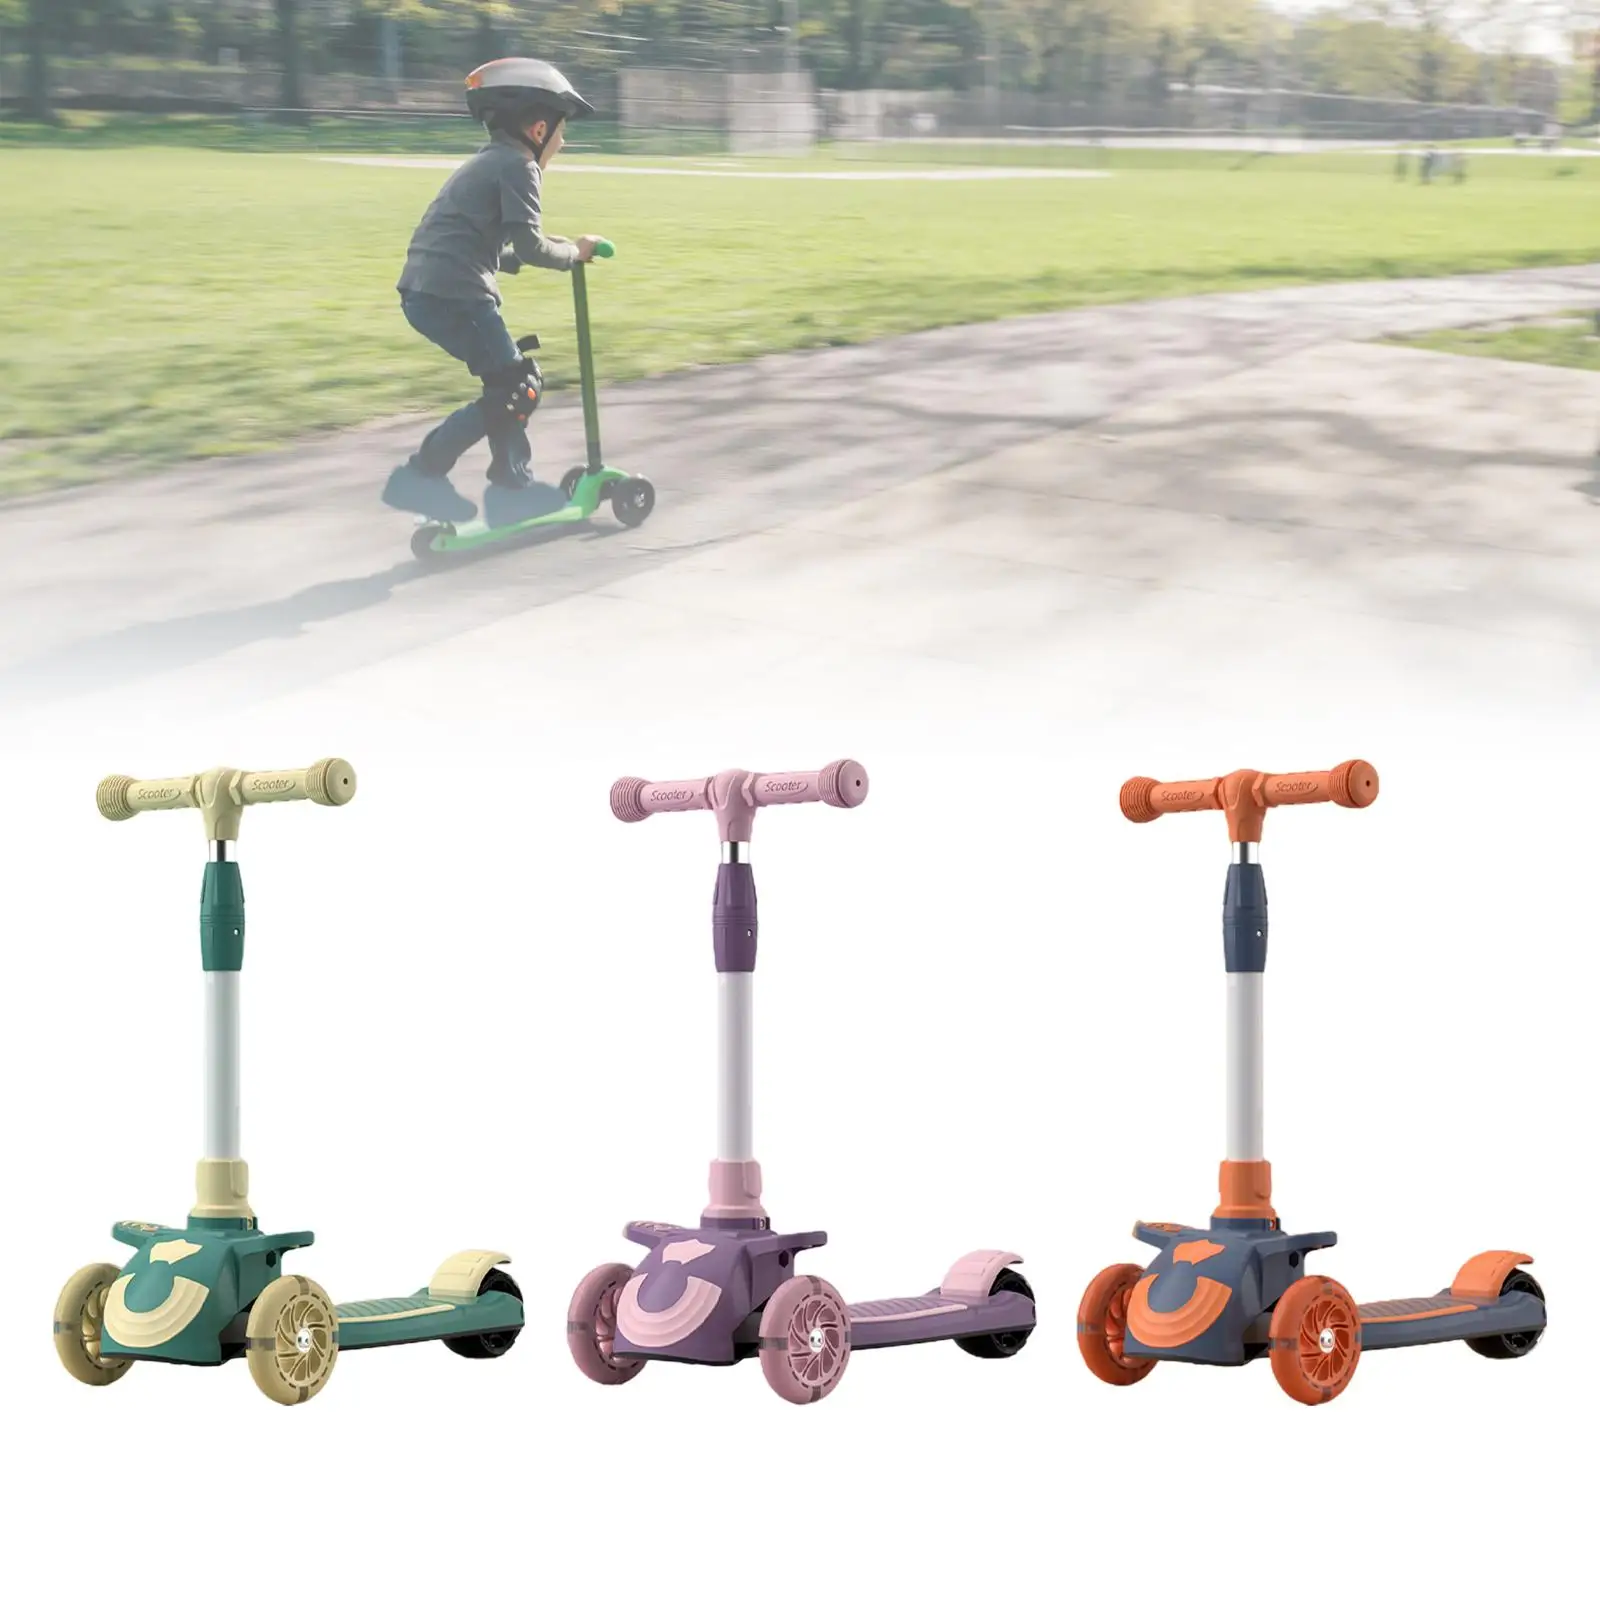 Children Kick Scooter Portable Stable 4 Level Adjustable Height Flashing Kids Scooter for Park Playing Outdoor Patio Activity